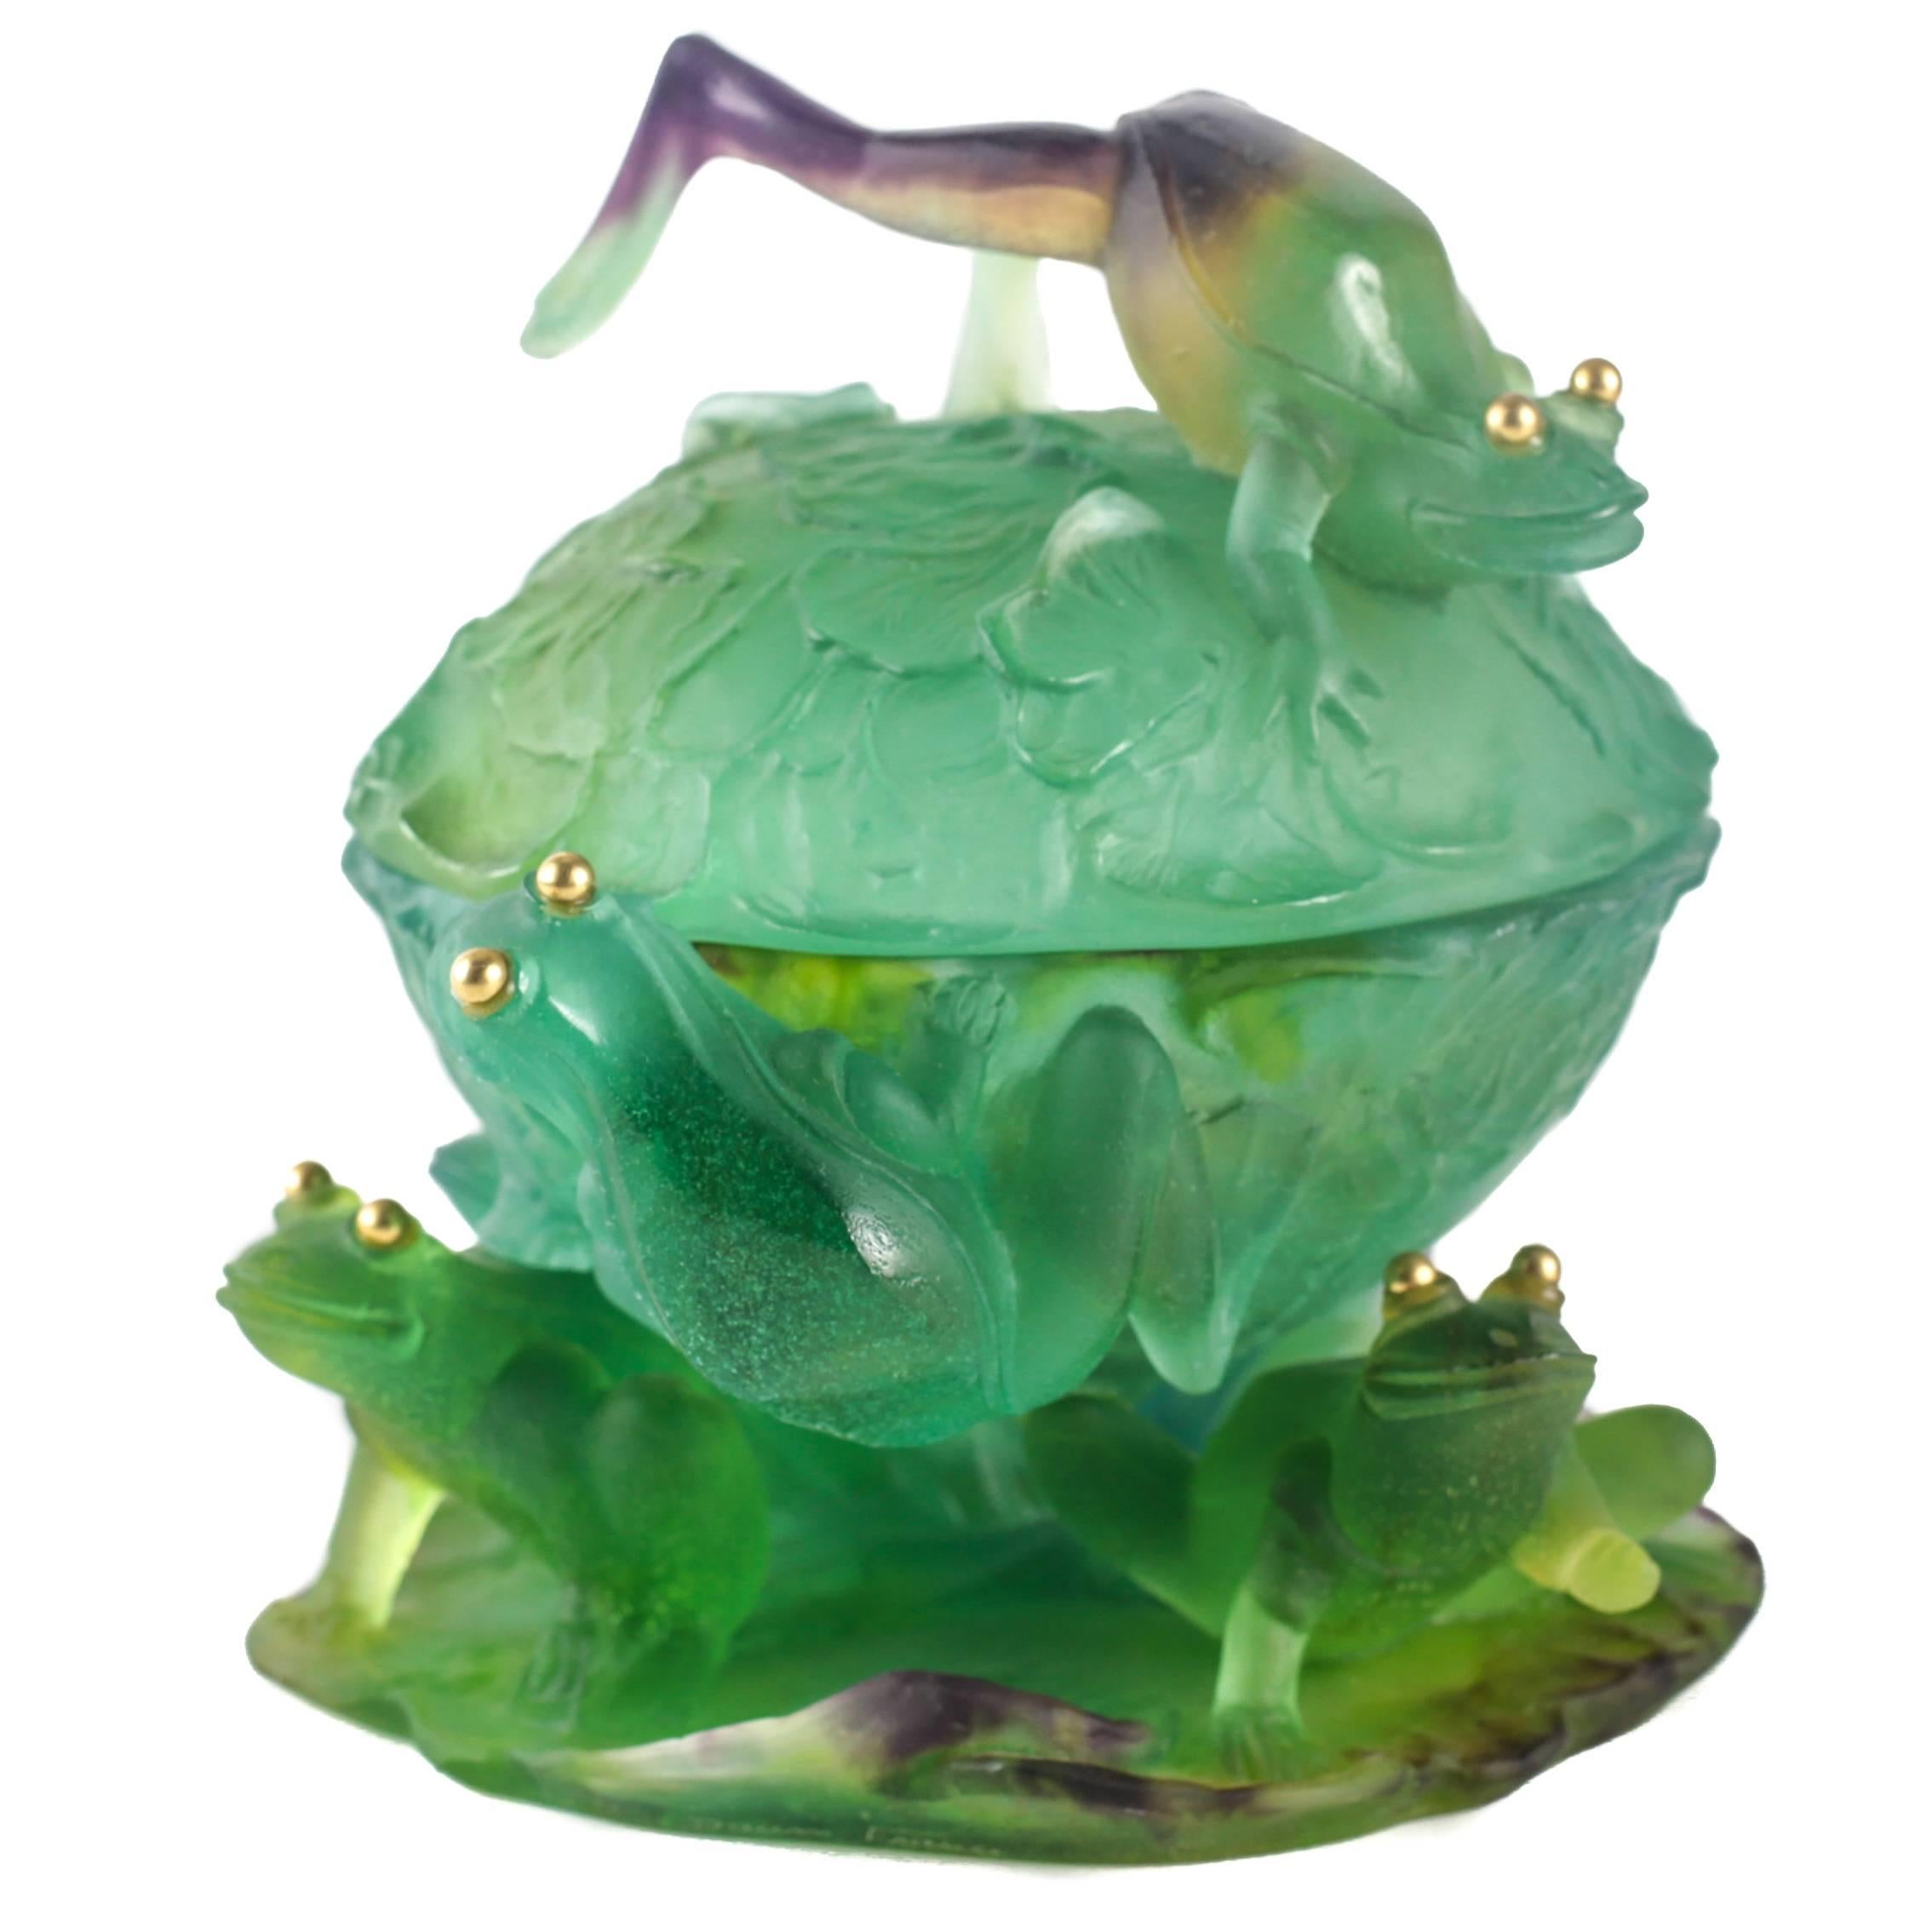 Whimsical Pate De Verre Covered Bowl with Frogs by Daum Nancy